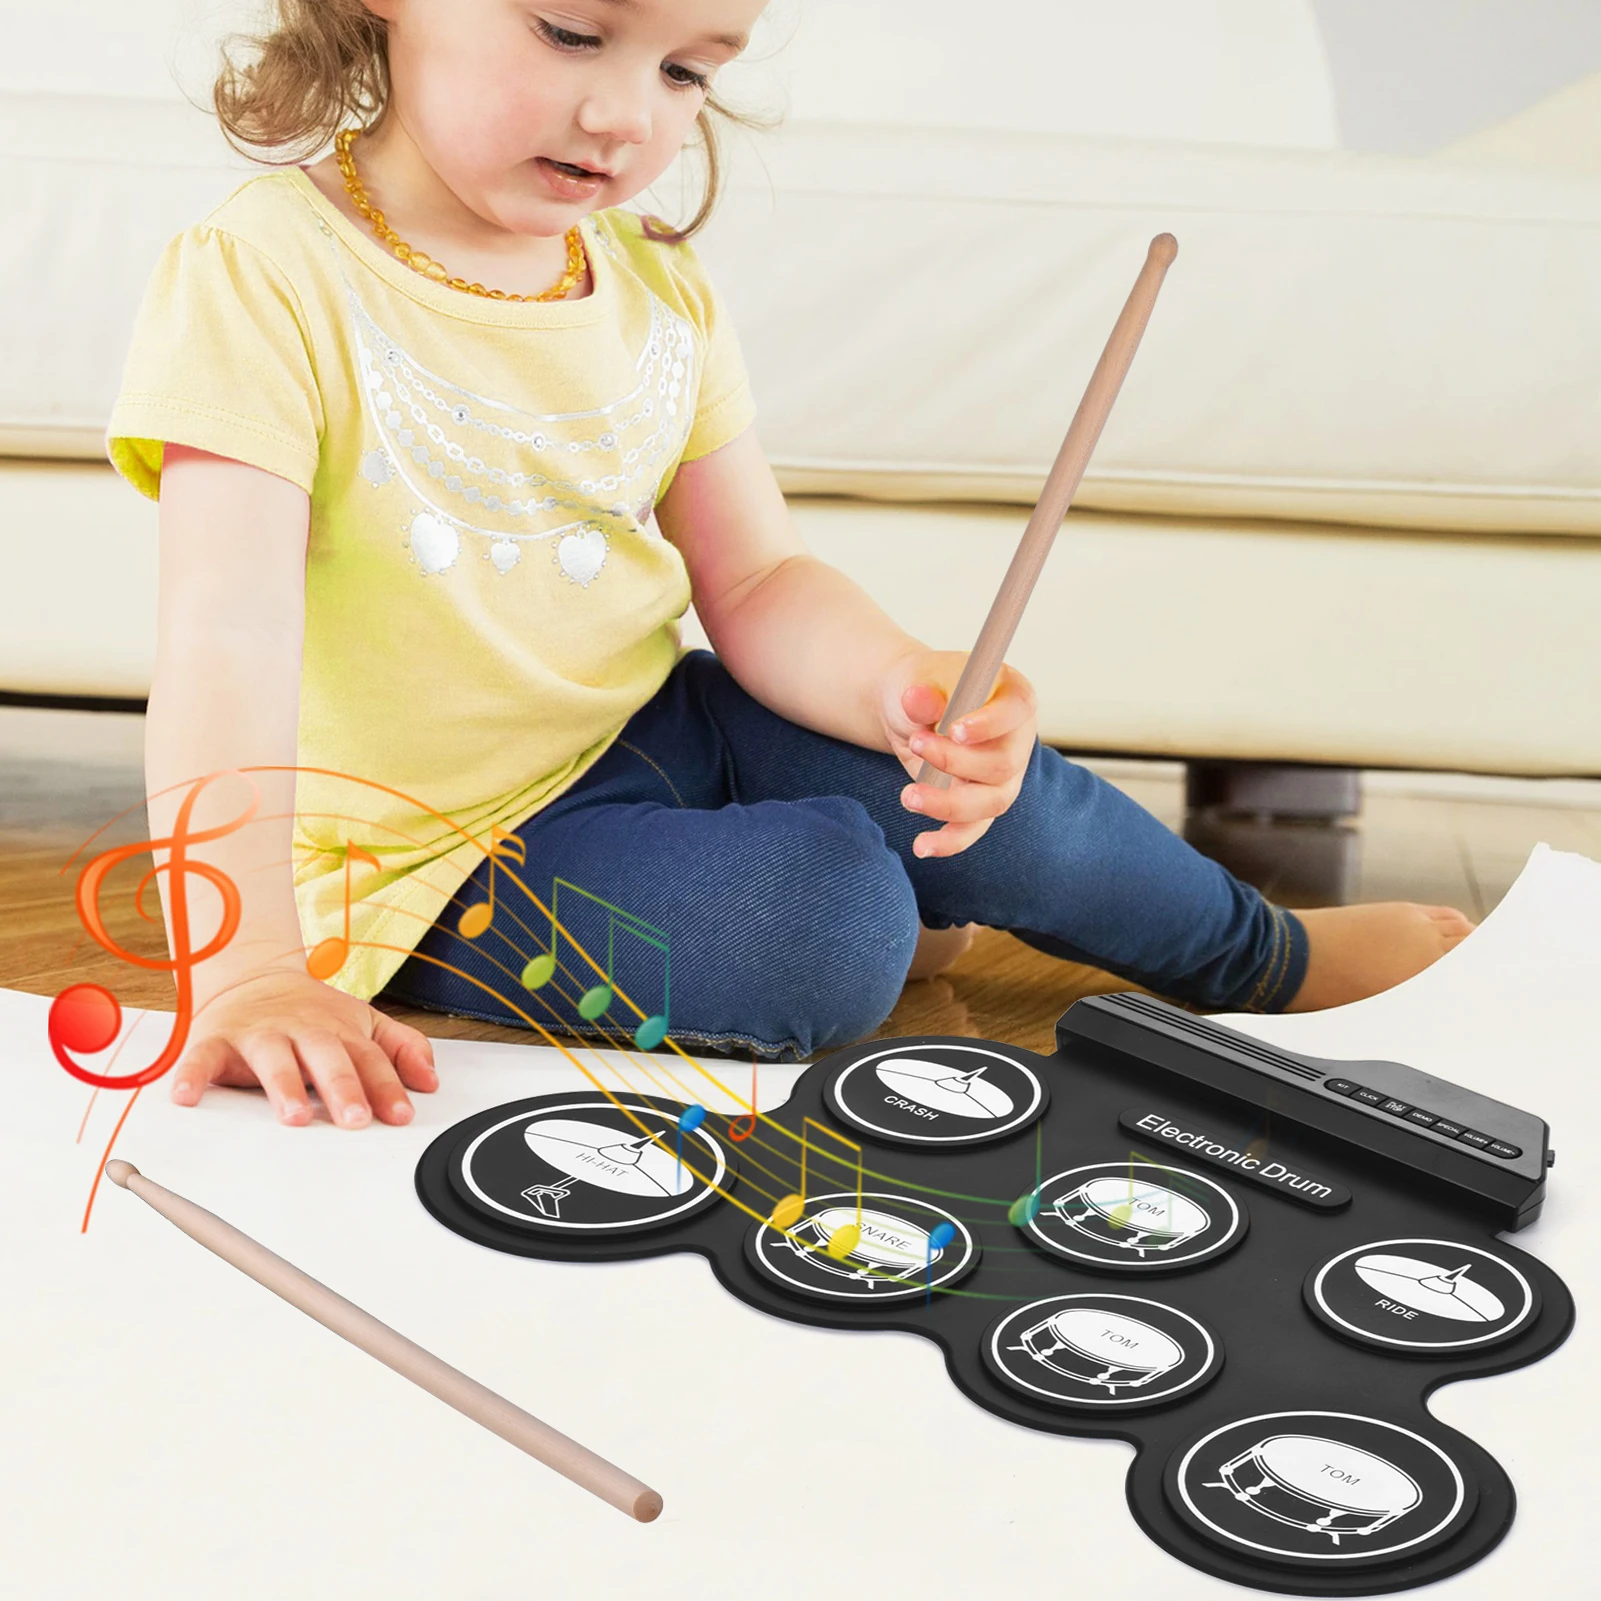 

Compact Size USB Roll-Up Silicon Drum Set Digital Electronic Drum Kit 7 Drum Pads Drumsticks Foot Pedals Beginners Children